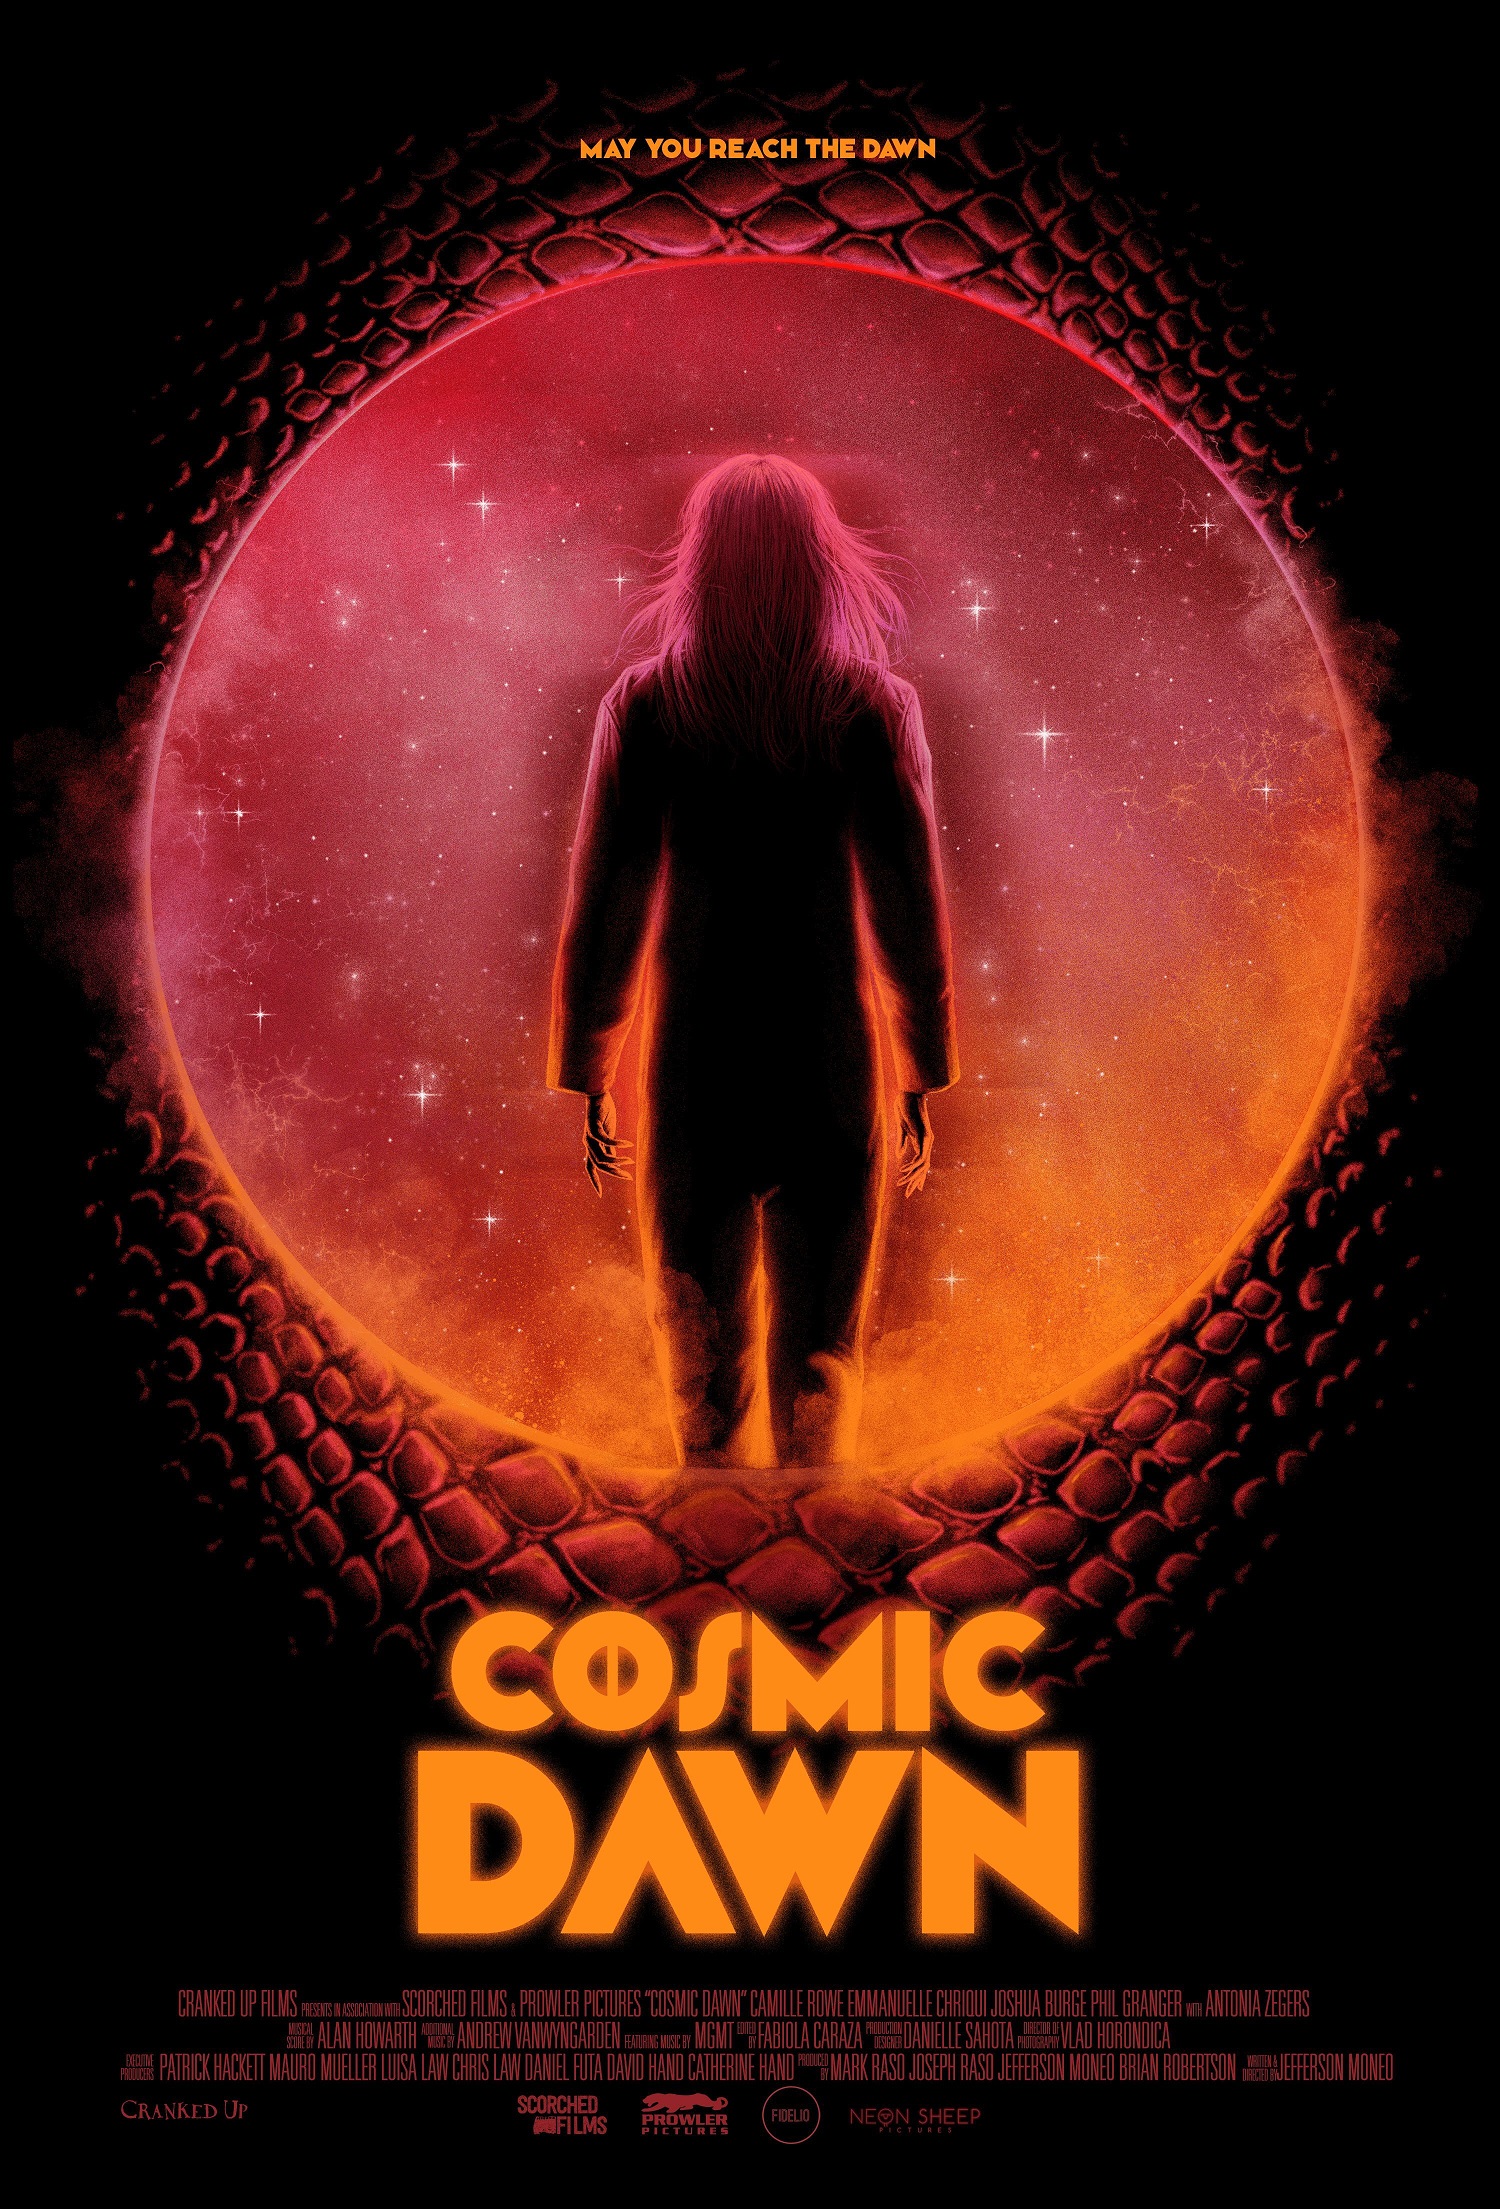 Cosmic Dawn Movie Review